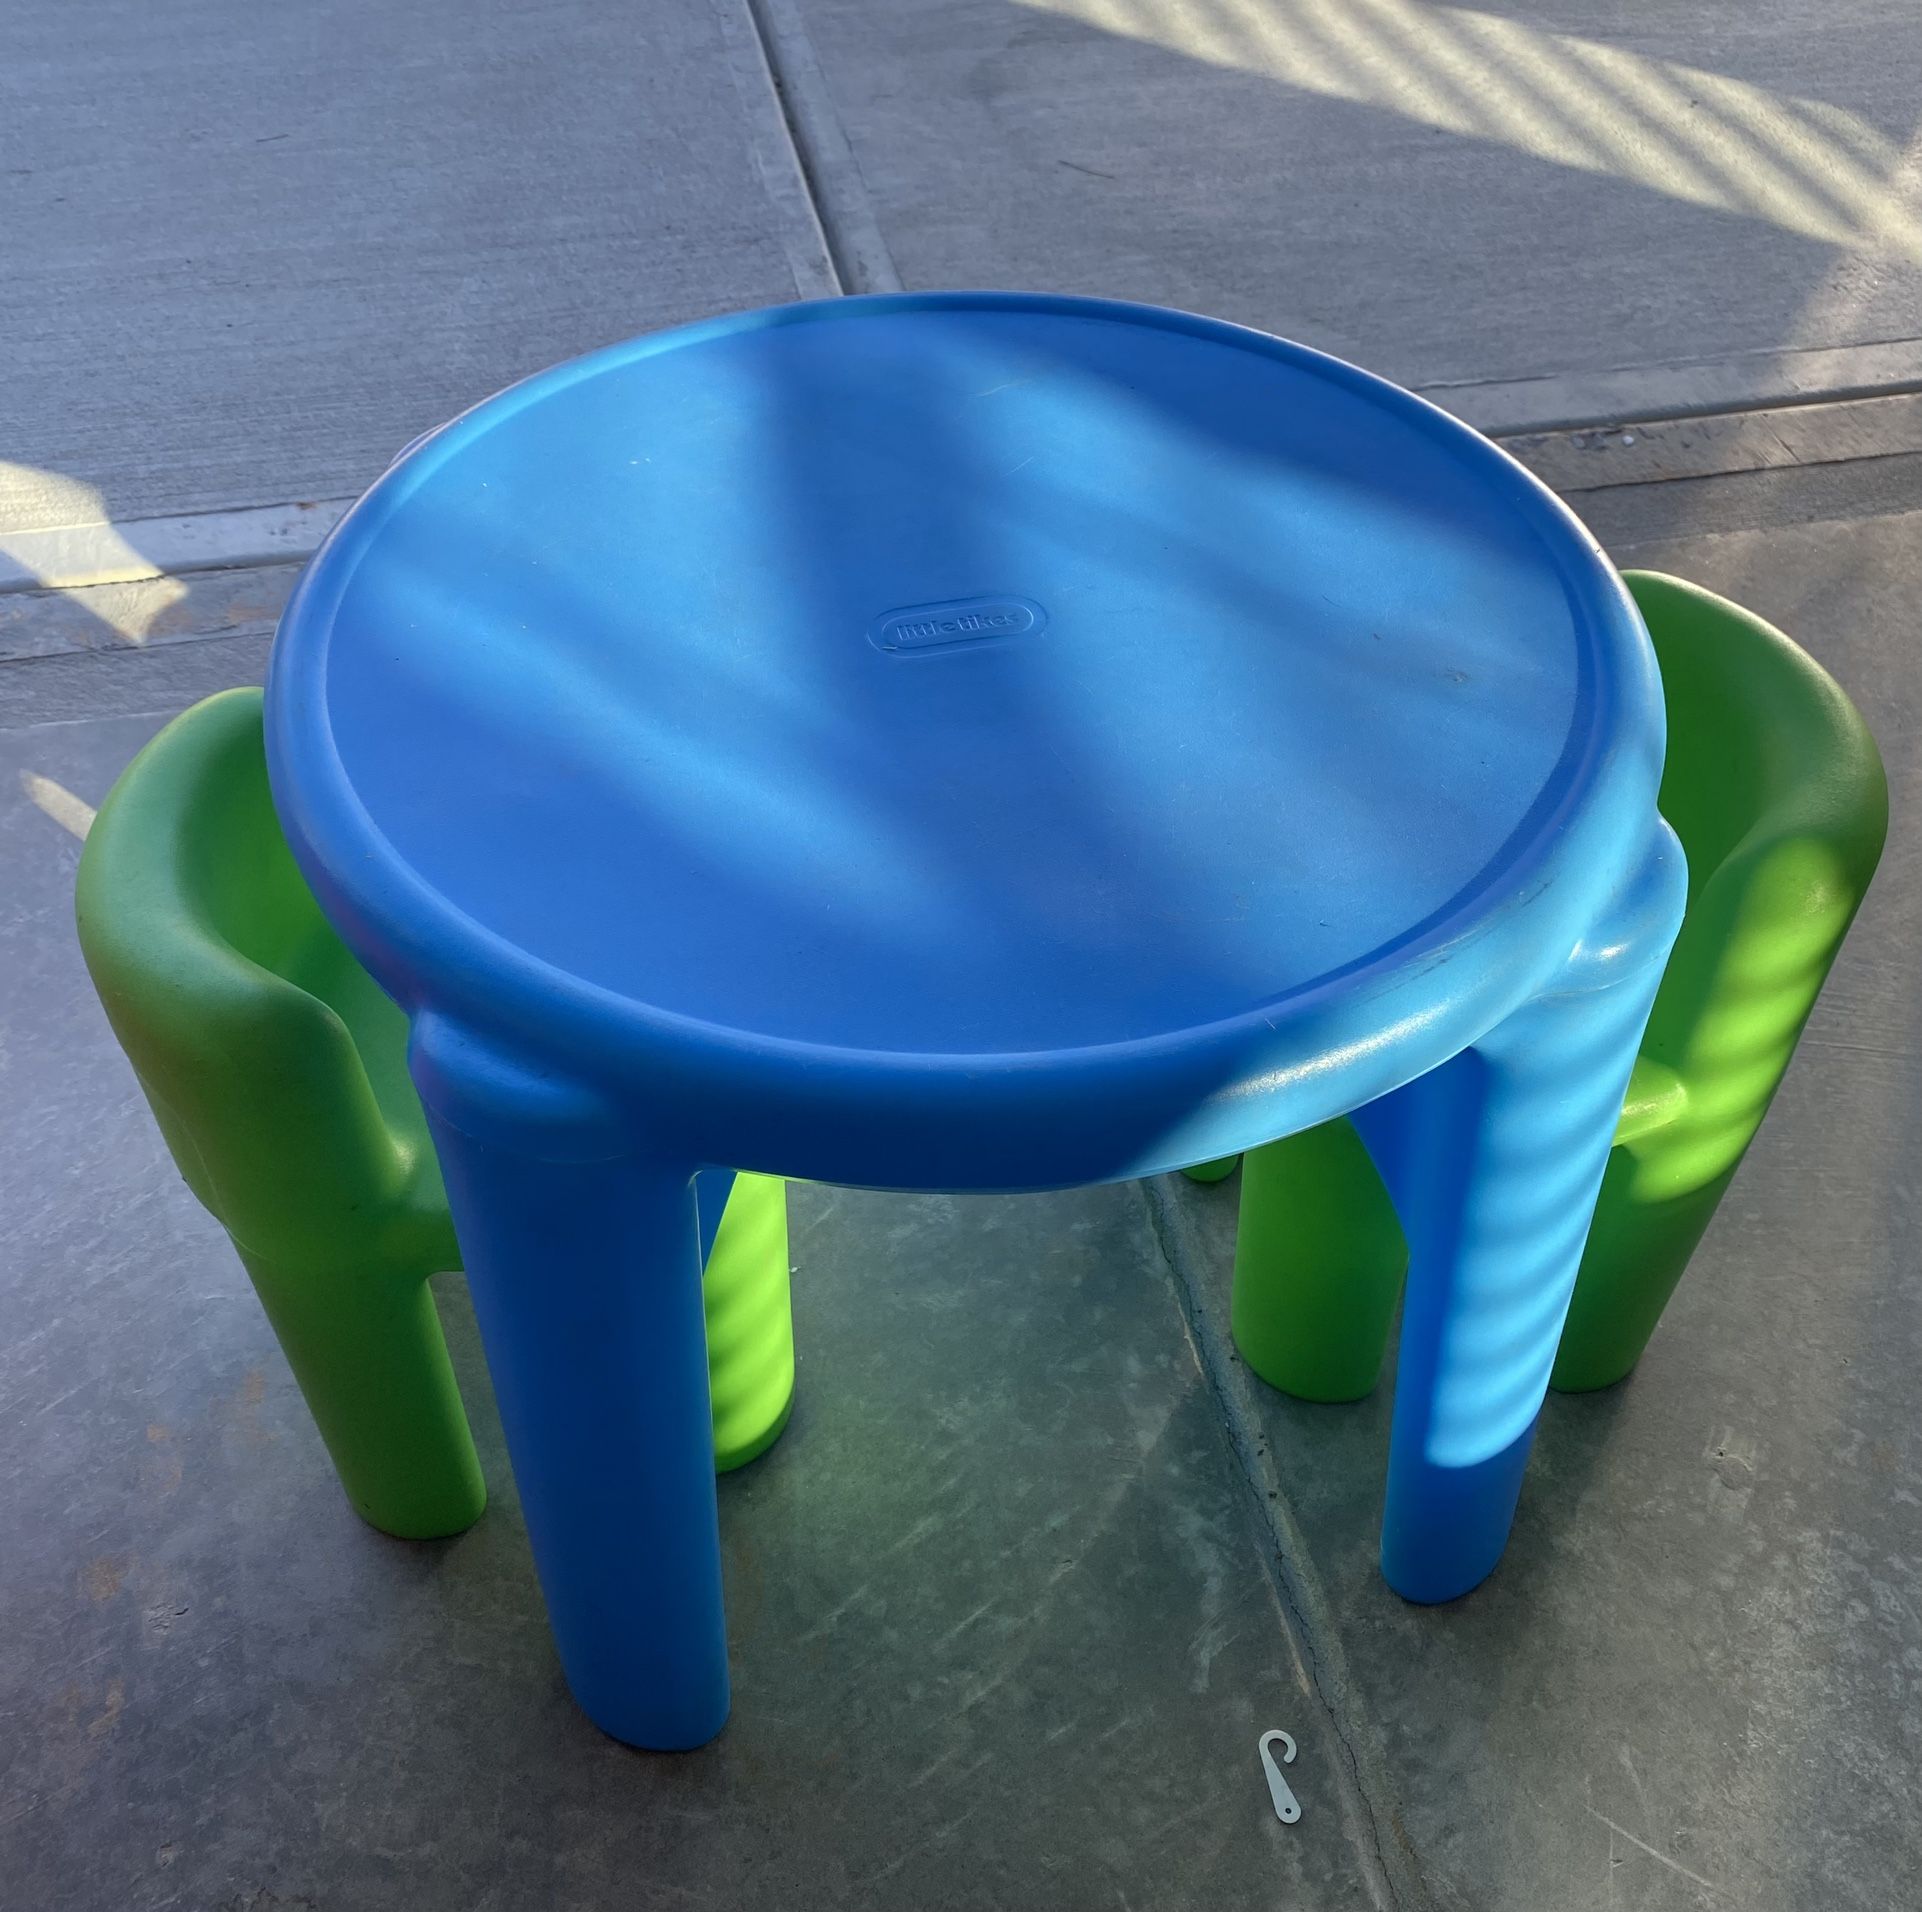 Little Tikes Table and Chair Set, Blue and Green